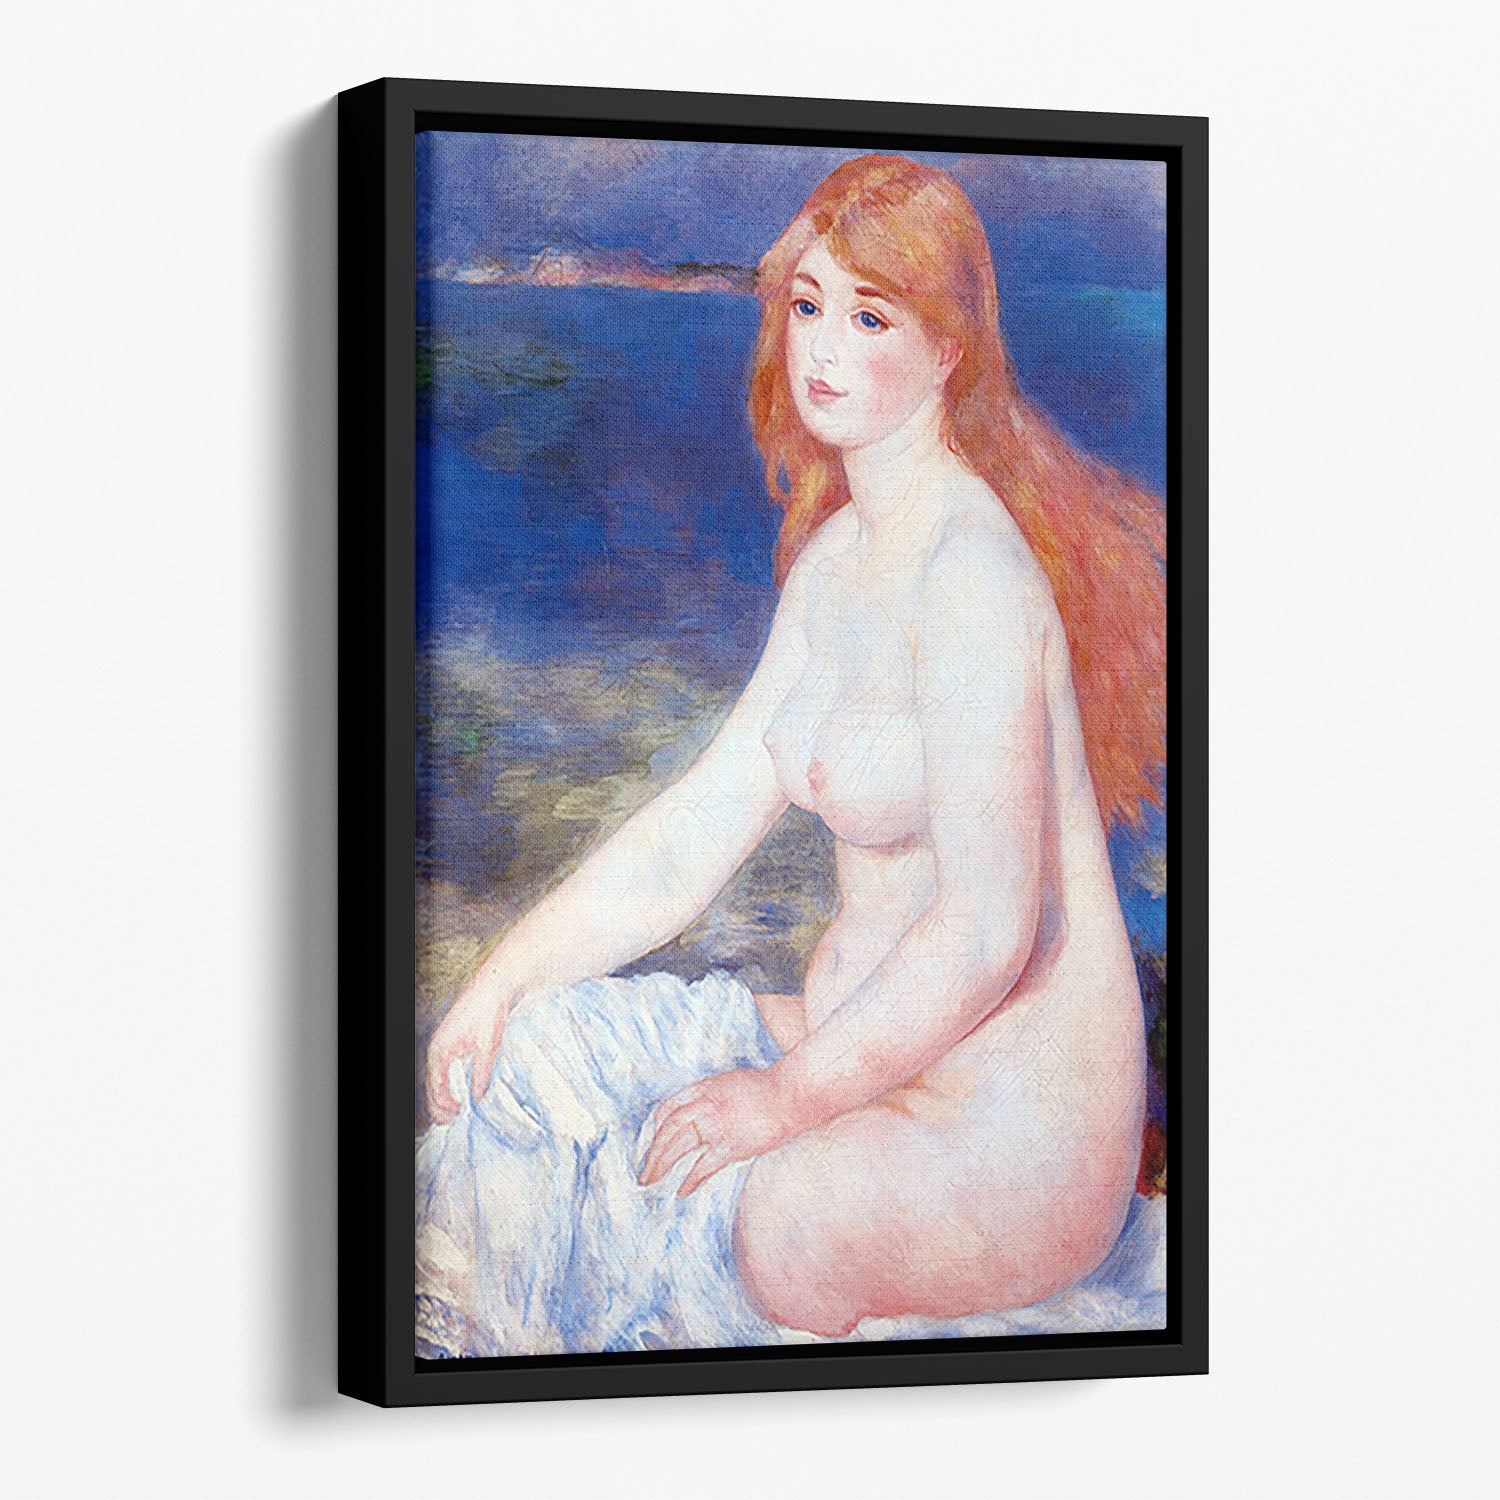 The blond bather 2 by Renoir Floating Framed Canvas